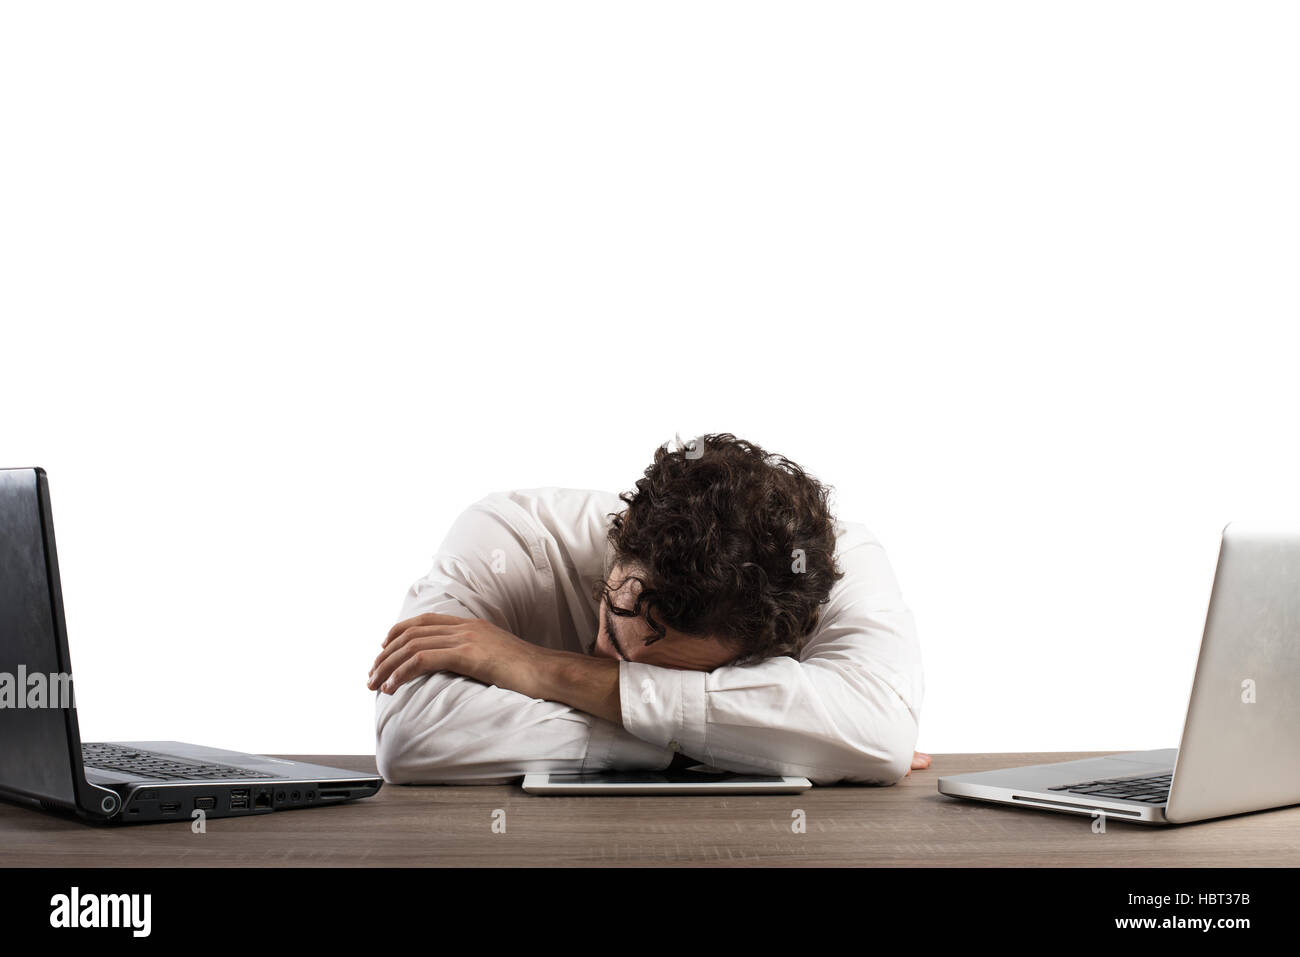 Exhaustion from overwork Stock Photo